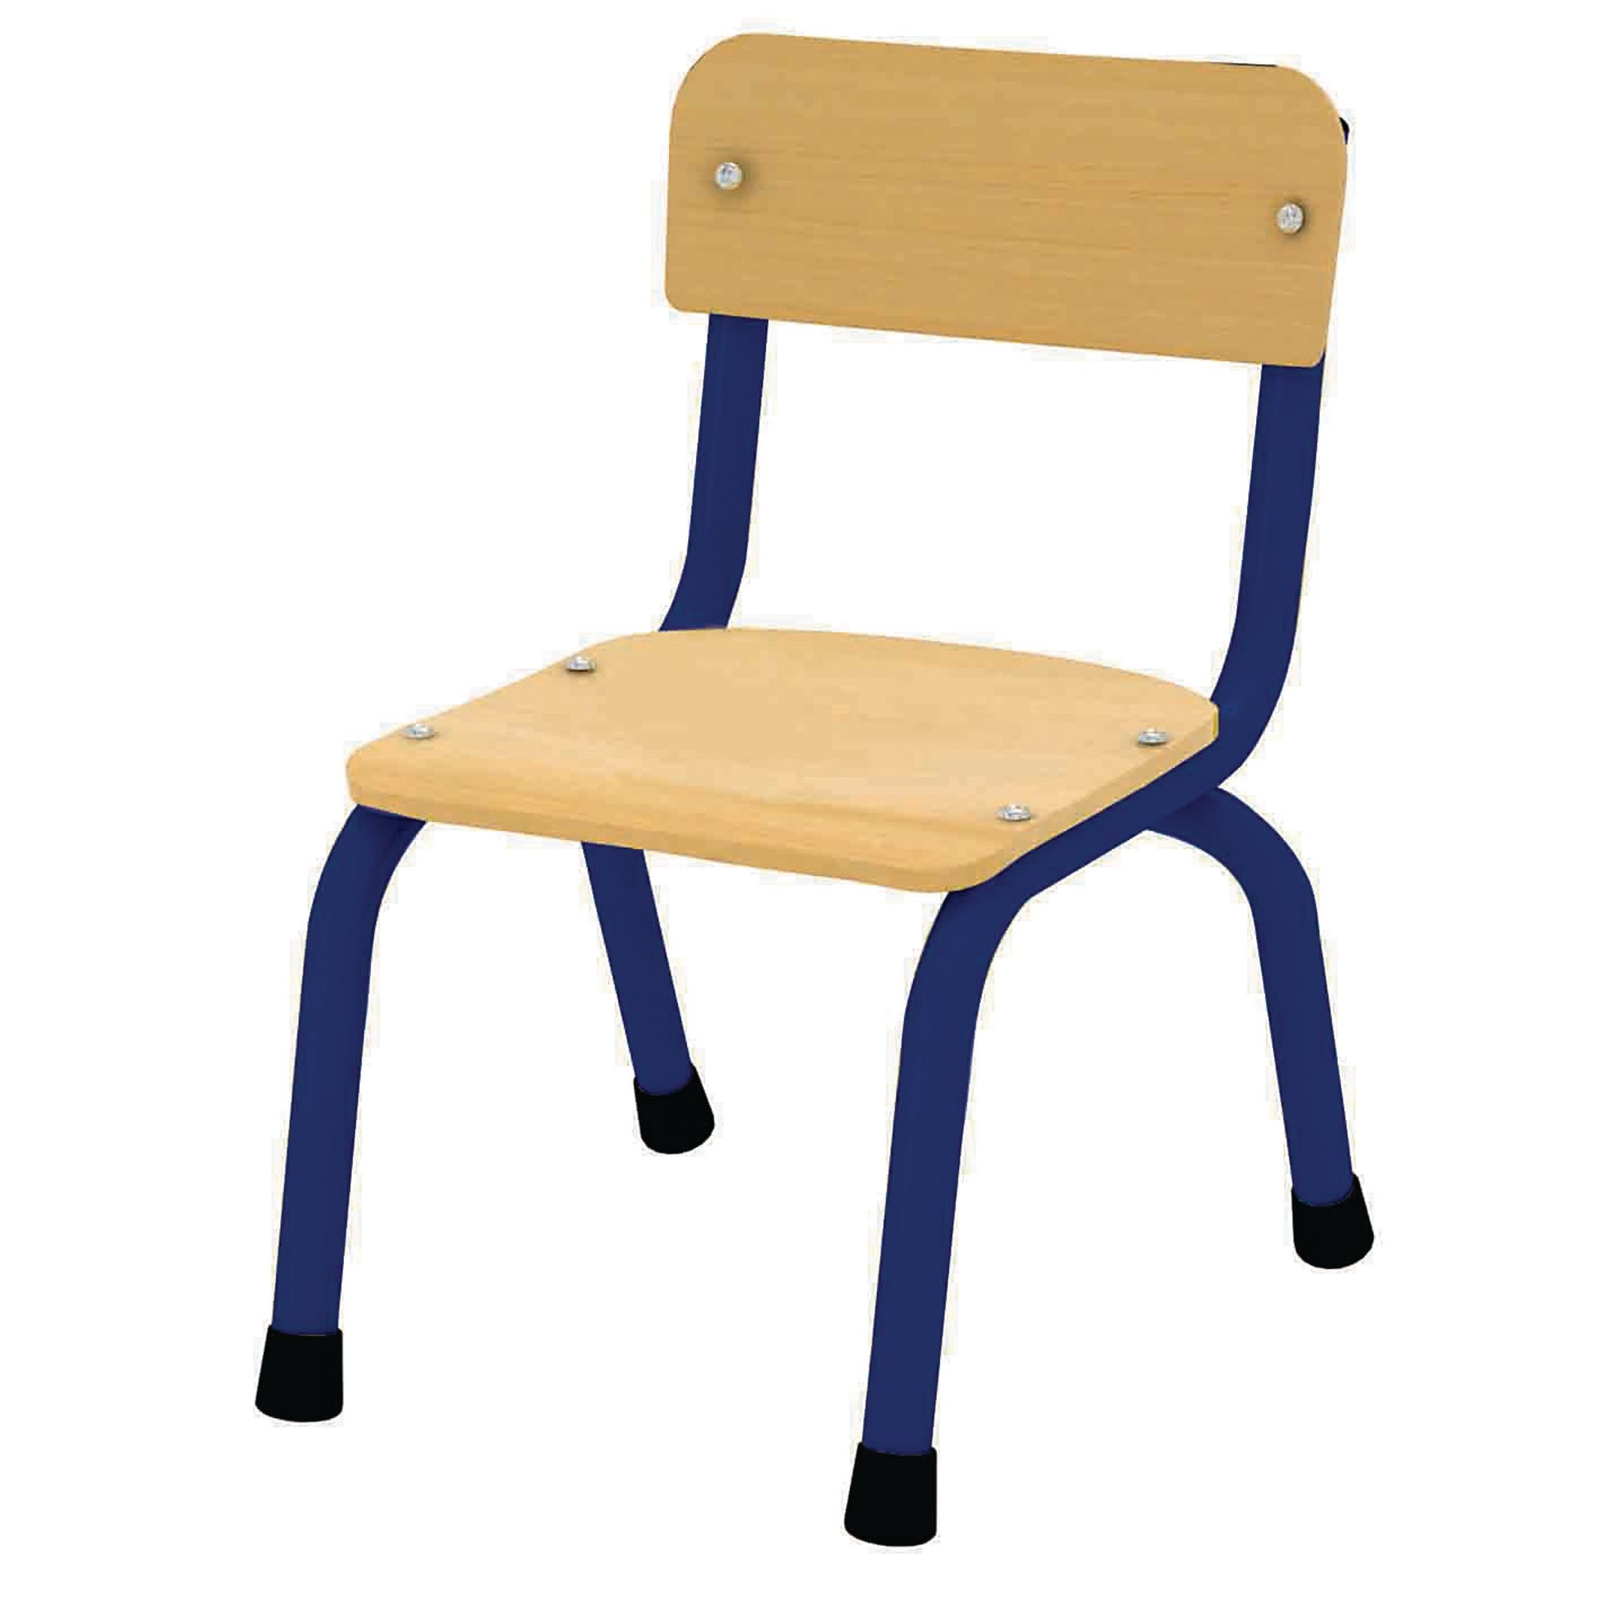 Milan 260mm Seat Height Chairs - Age 3-4 - Blue - Set of 4